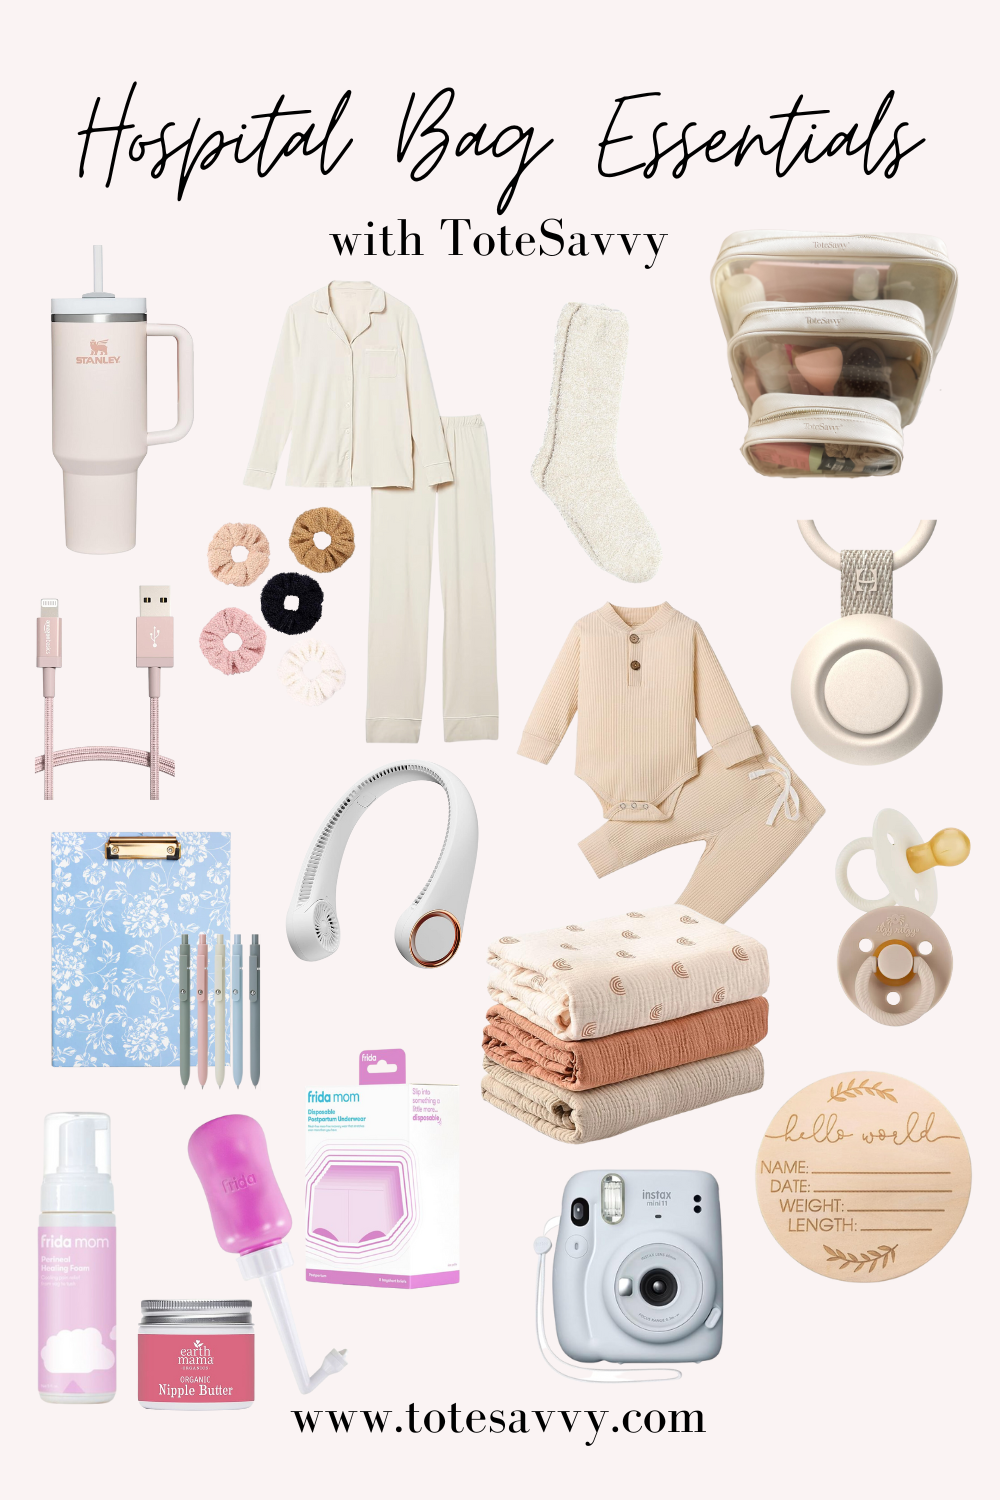 http://www.totesavvy.com/cdn/shop/articles/Hospital_Bag_Essentials_Packed_With_ToteSavvy.png?v=1693947765